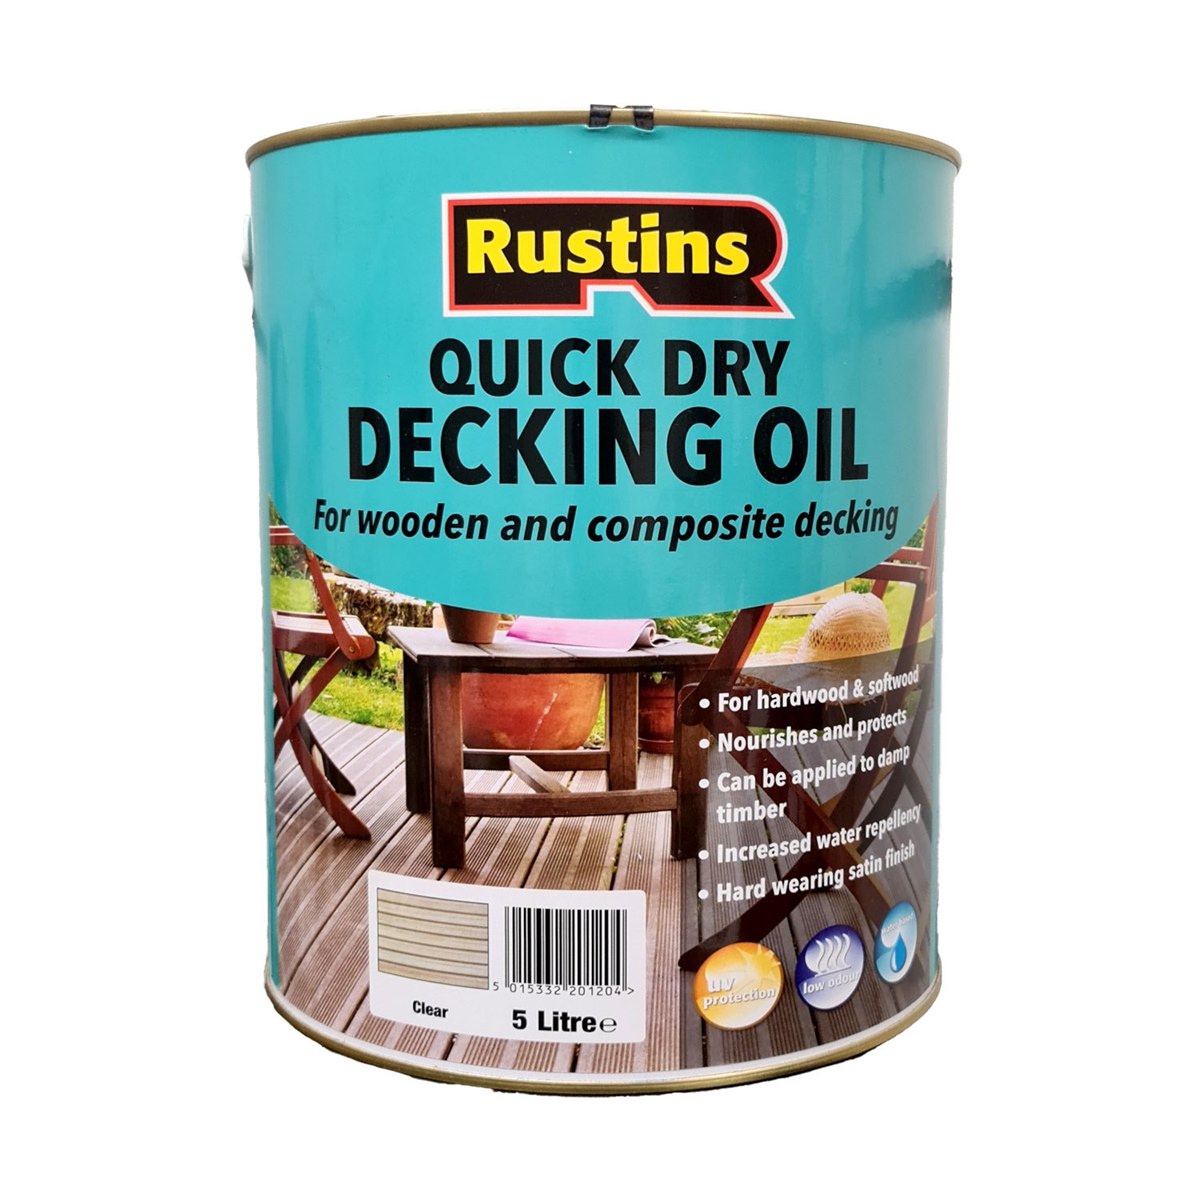 Rustins Quick Dry Decking Oil Clear 5 Litre